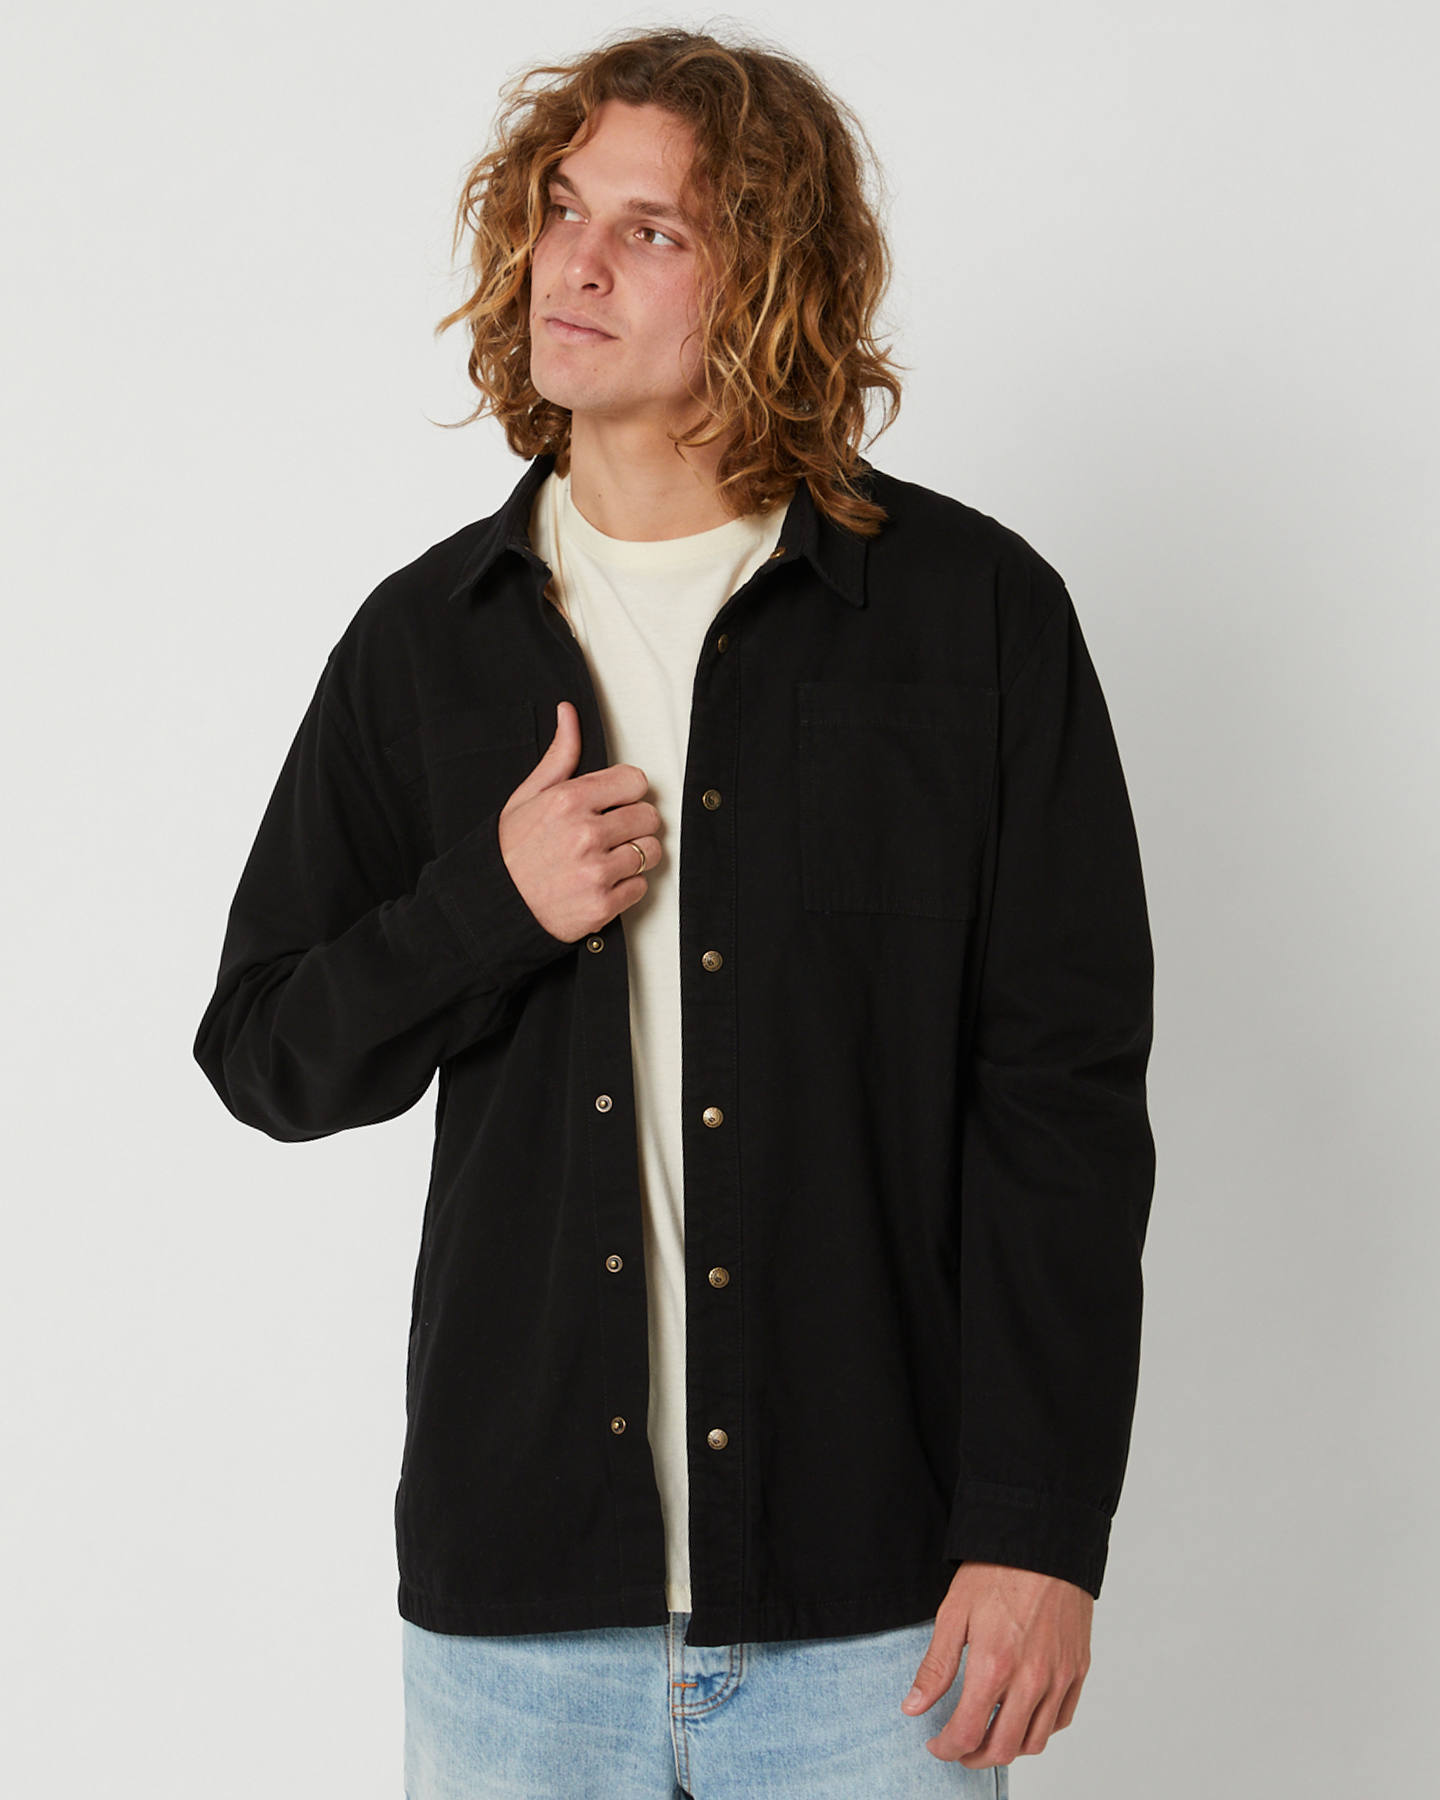 Town And Country Kauai Jacket - Black | SurfStitch